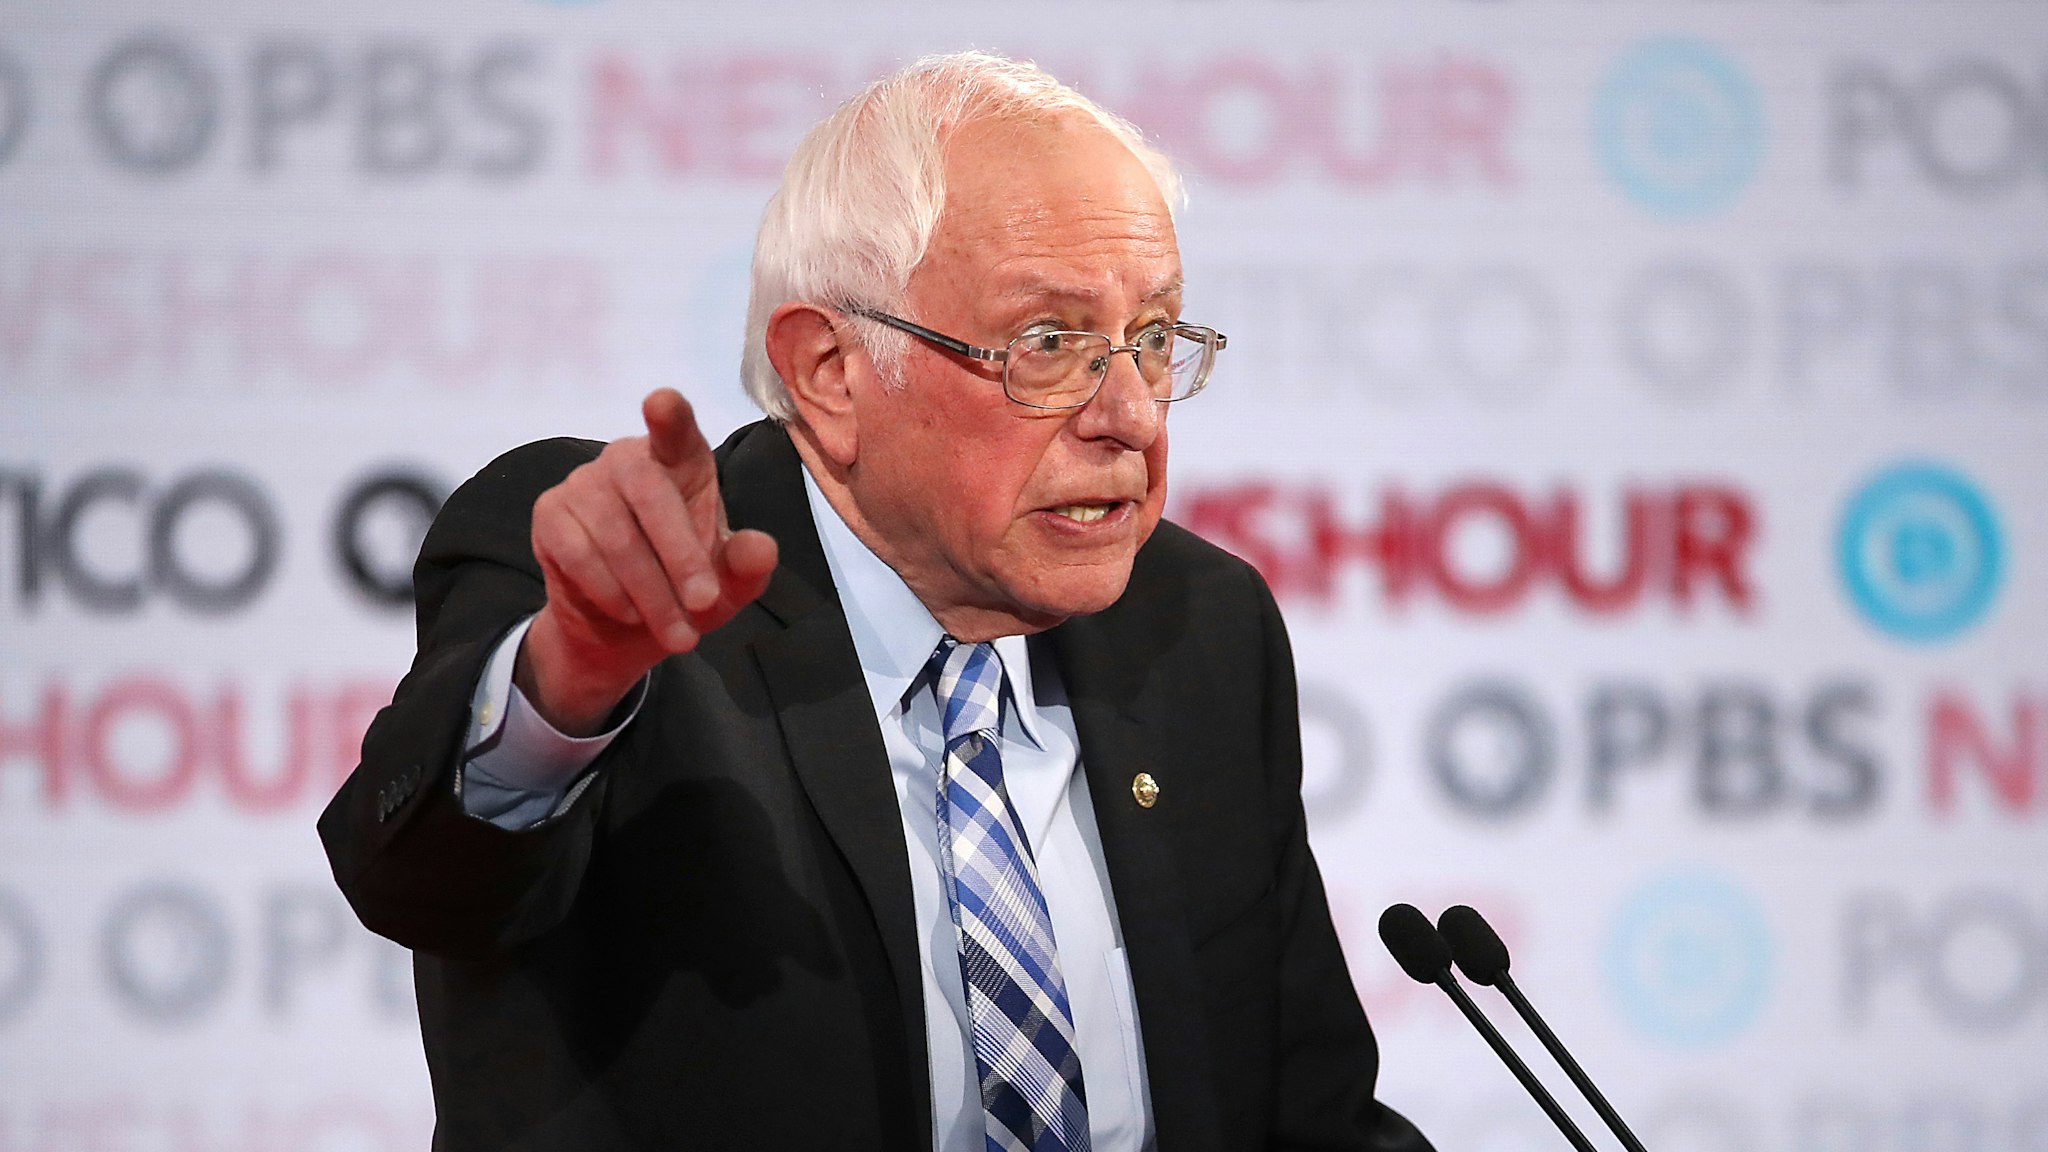 LOS ANGELES, CALIFORNIA - DECEMBER 19: Sen. Bernie Sanders (I-VT) points during the Democratic presidential primary debate at Loyola Marymount University on December 19, 2019 in Los Angeles, California. Seven candidates out of the crowded field qualified for the 6th and last Democratic presidential primary debate of 2019 hosted by PBS NewsHour and Politico.